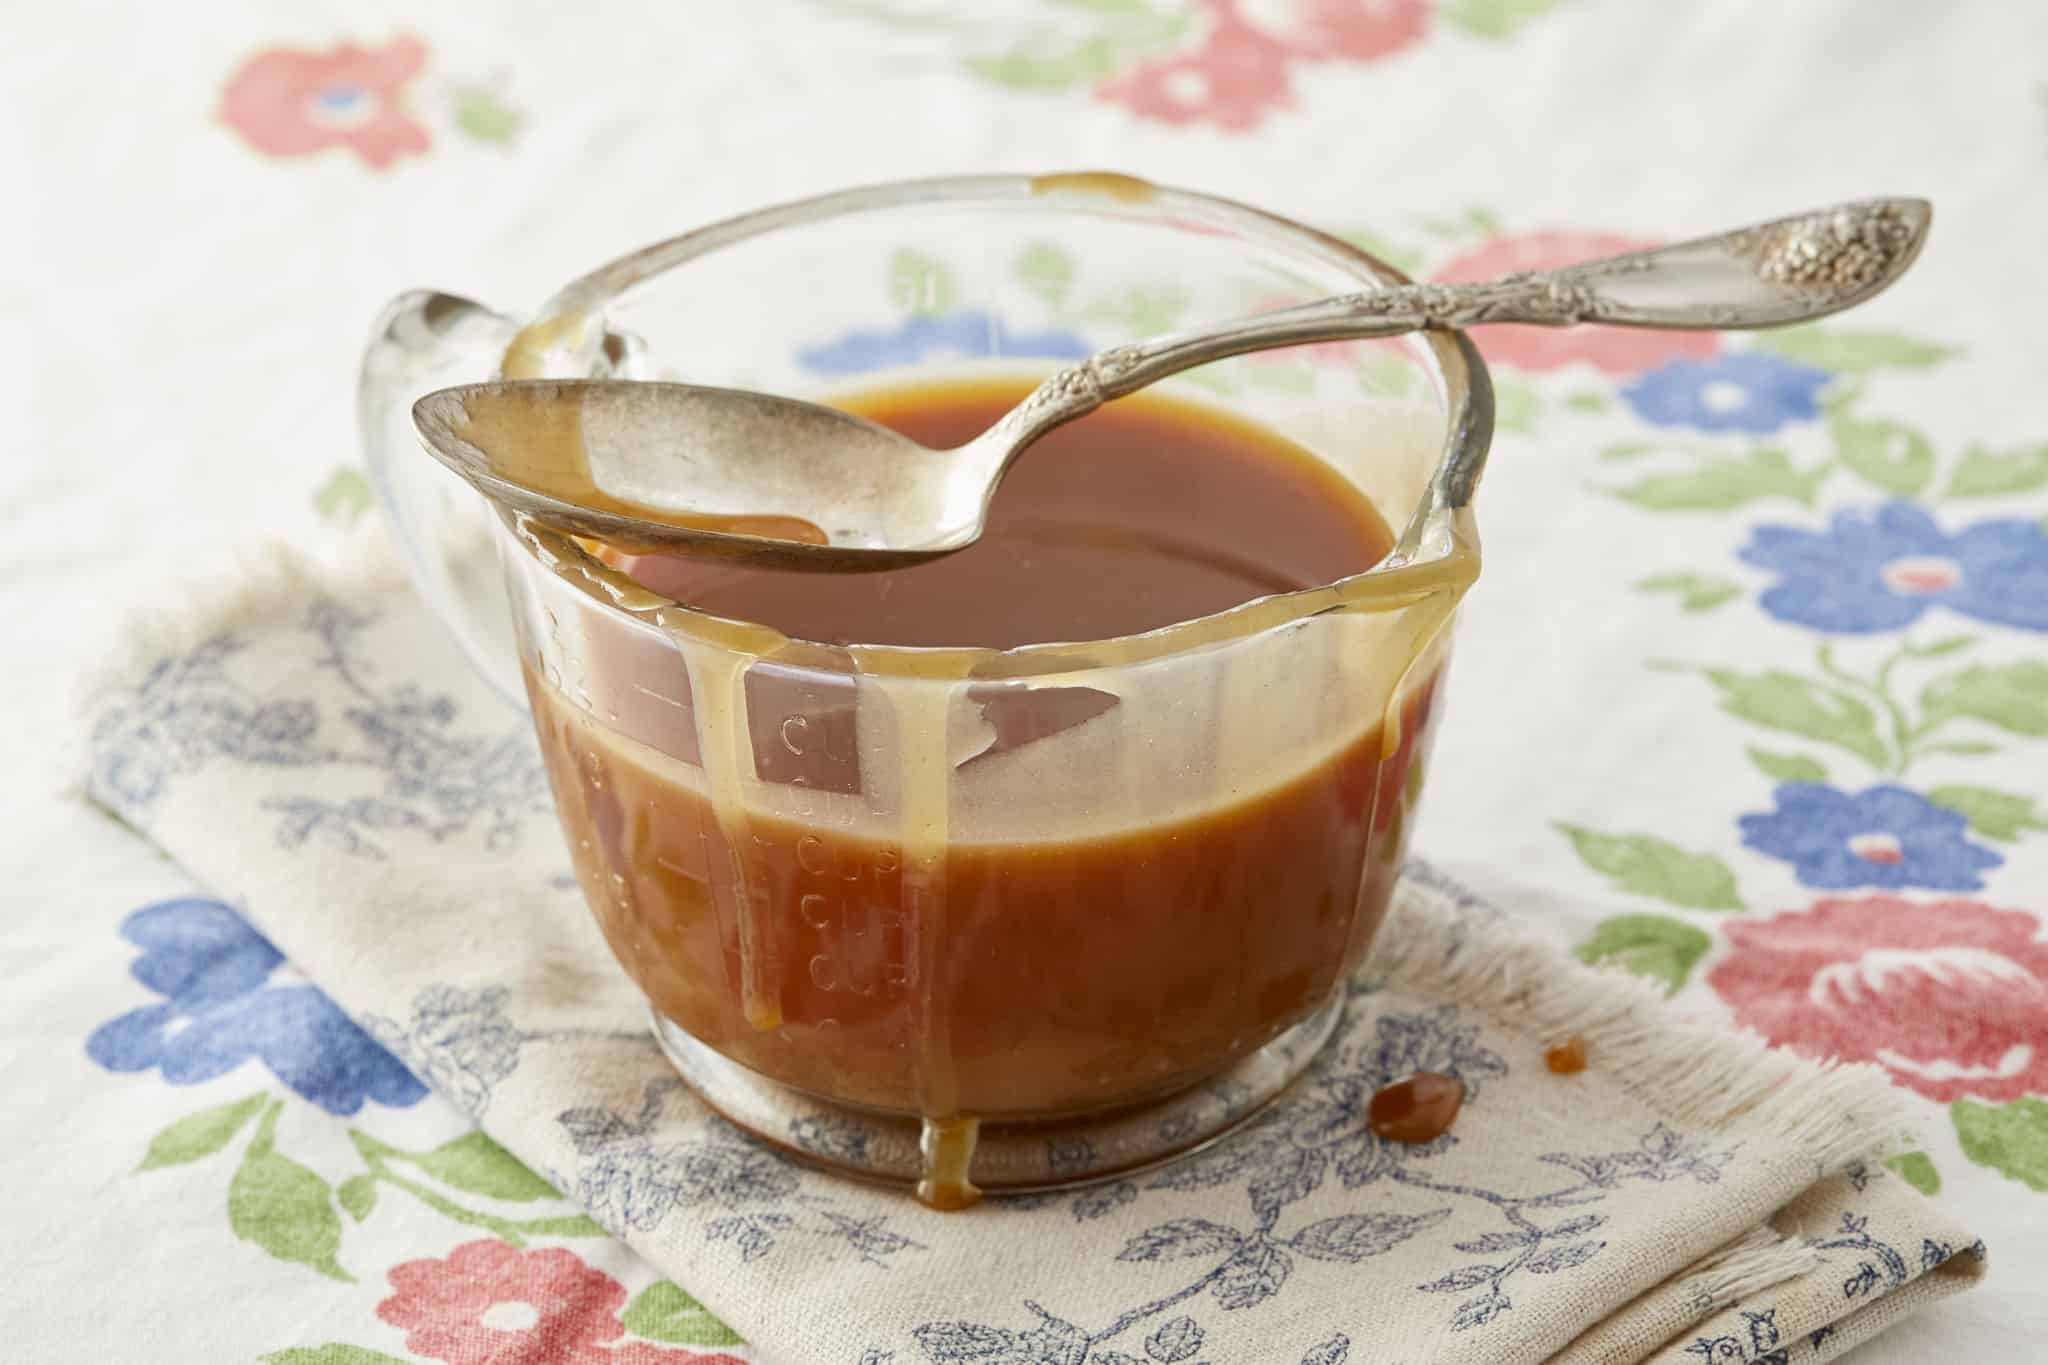 A glass jar of apple cider caramel sauce, with a spoon laid across the top, on a floral tablecloth.